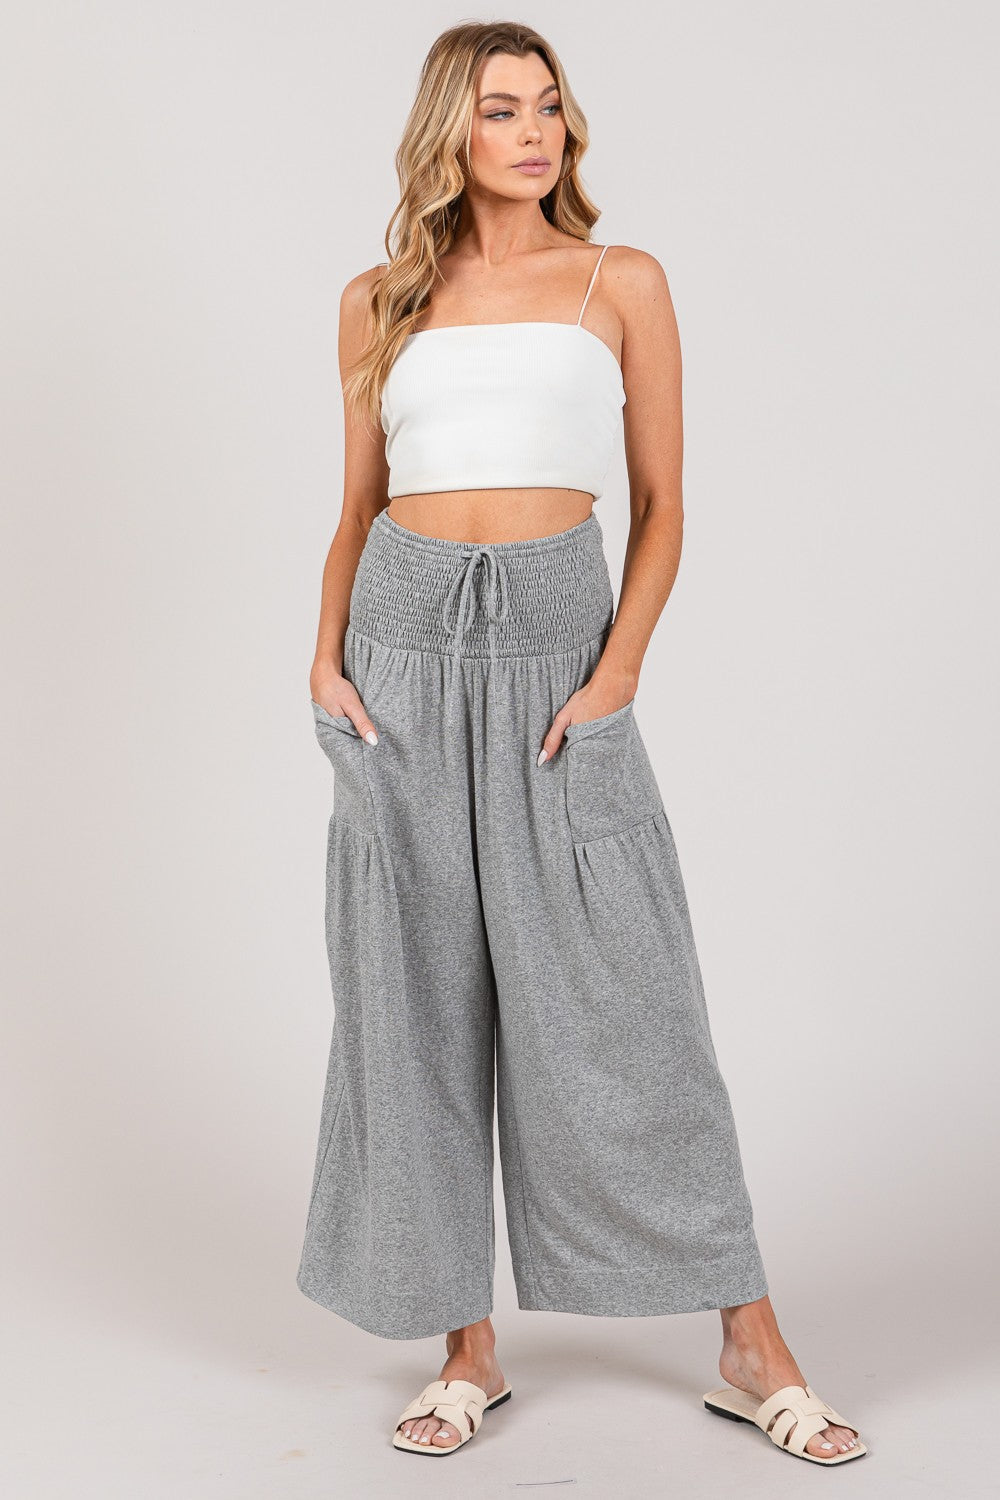 Woman wearing stylish gray high waist smocked drawstring pants, perfect for chic outfits.